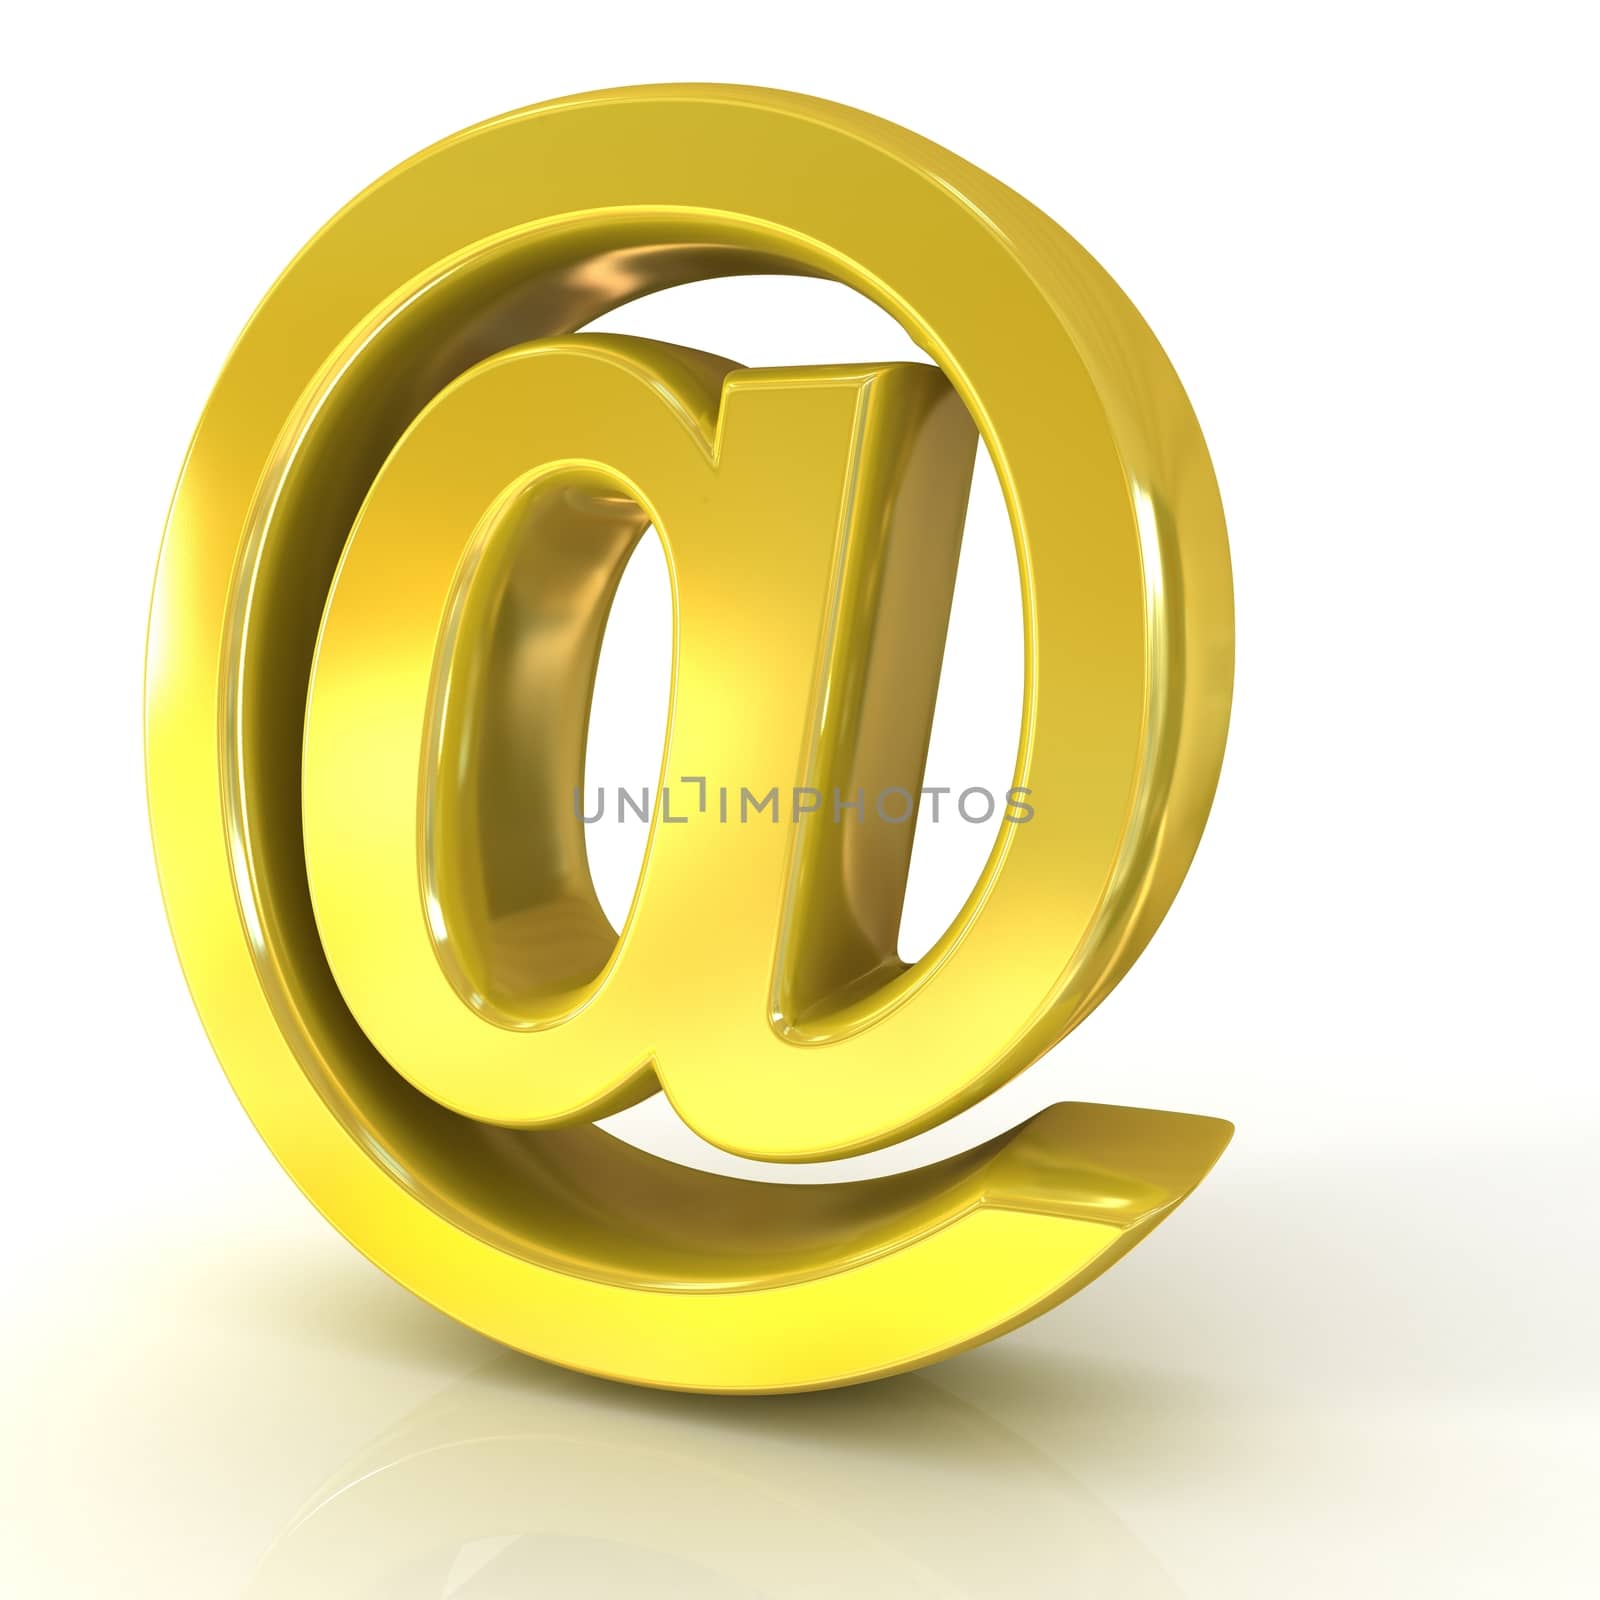 E-mail sign, at symbol, 3D golden isolated on white background